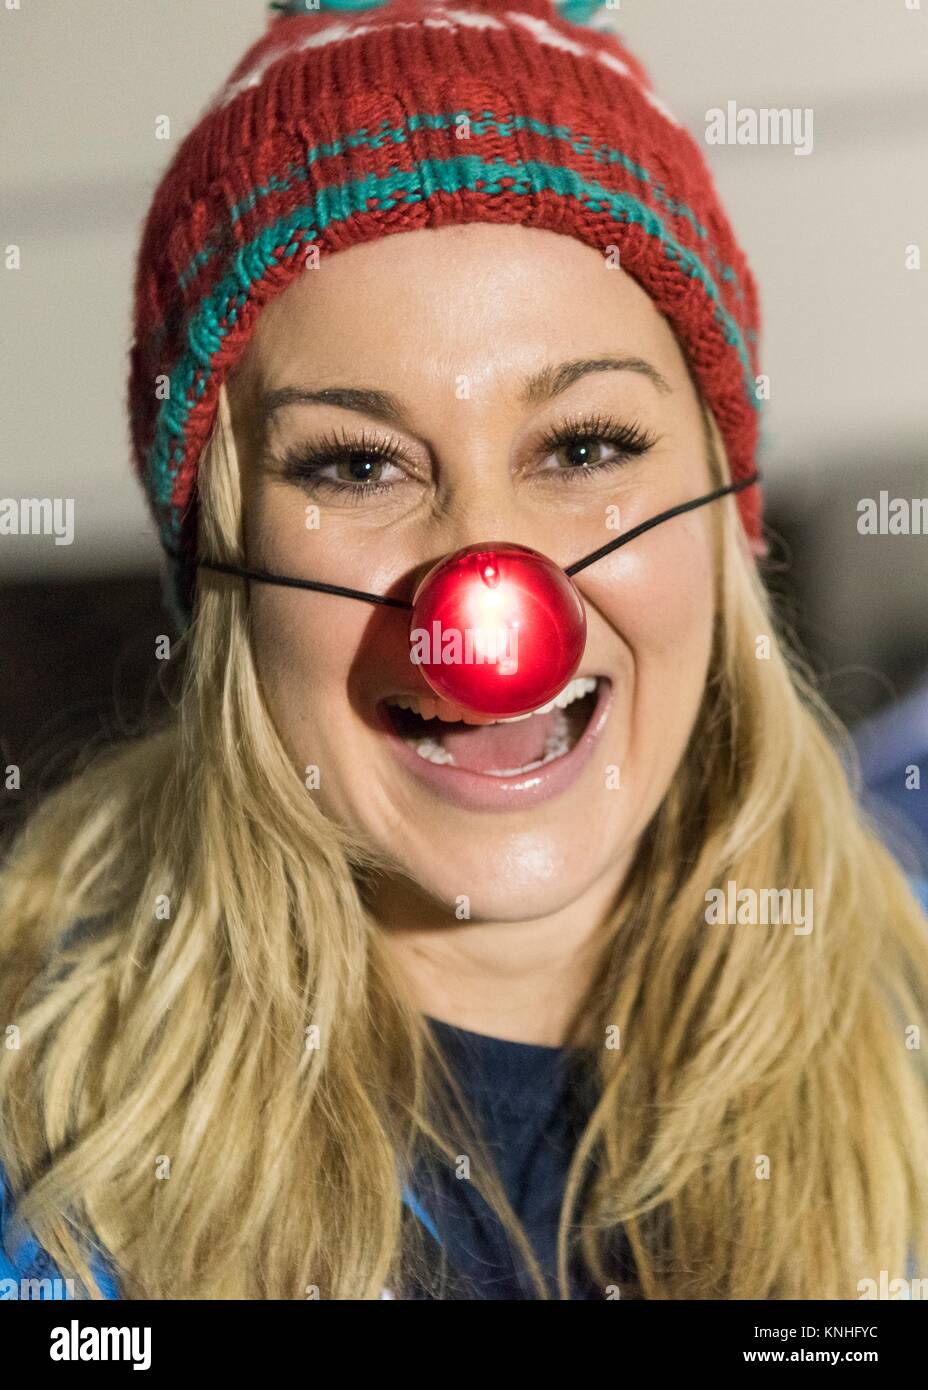 Country music singer Kellie Pickler wears a Rudolph the Red-Nosed Reindeer nose while performing for U.S. troops during the CJCS USO Holiday Tour December 25, 2016 in Iraq. (photo by PO2 Dominique A. Pineiro  via Planetpix) Stock Photo